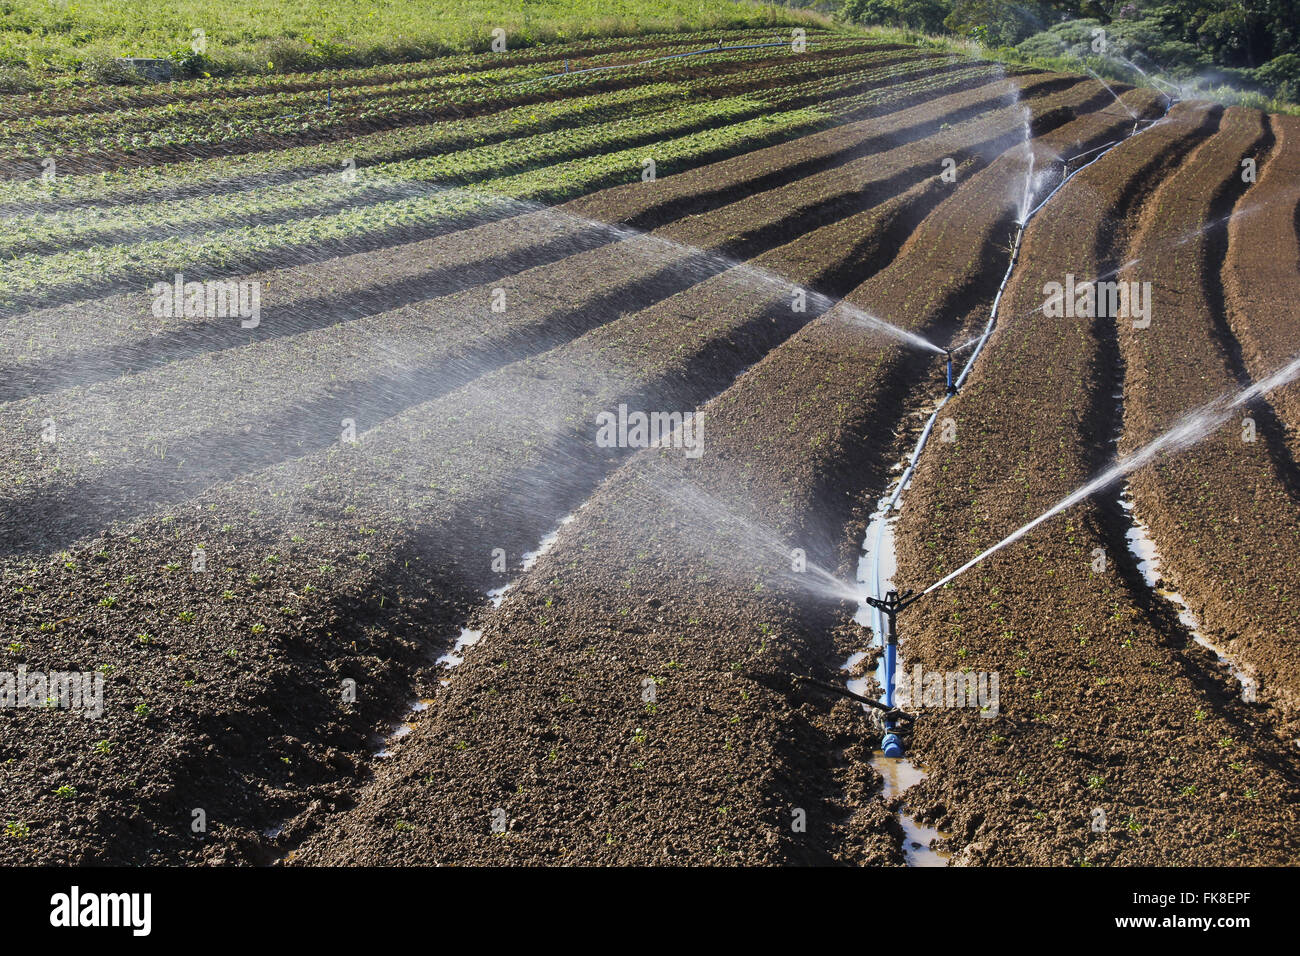 Sprinkler Irrigation High Resolution Stock Photography and Images - Alamy